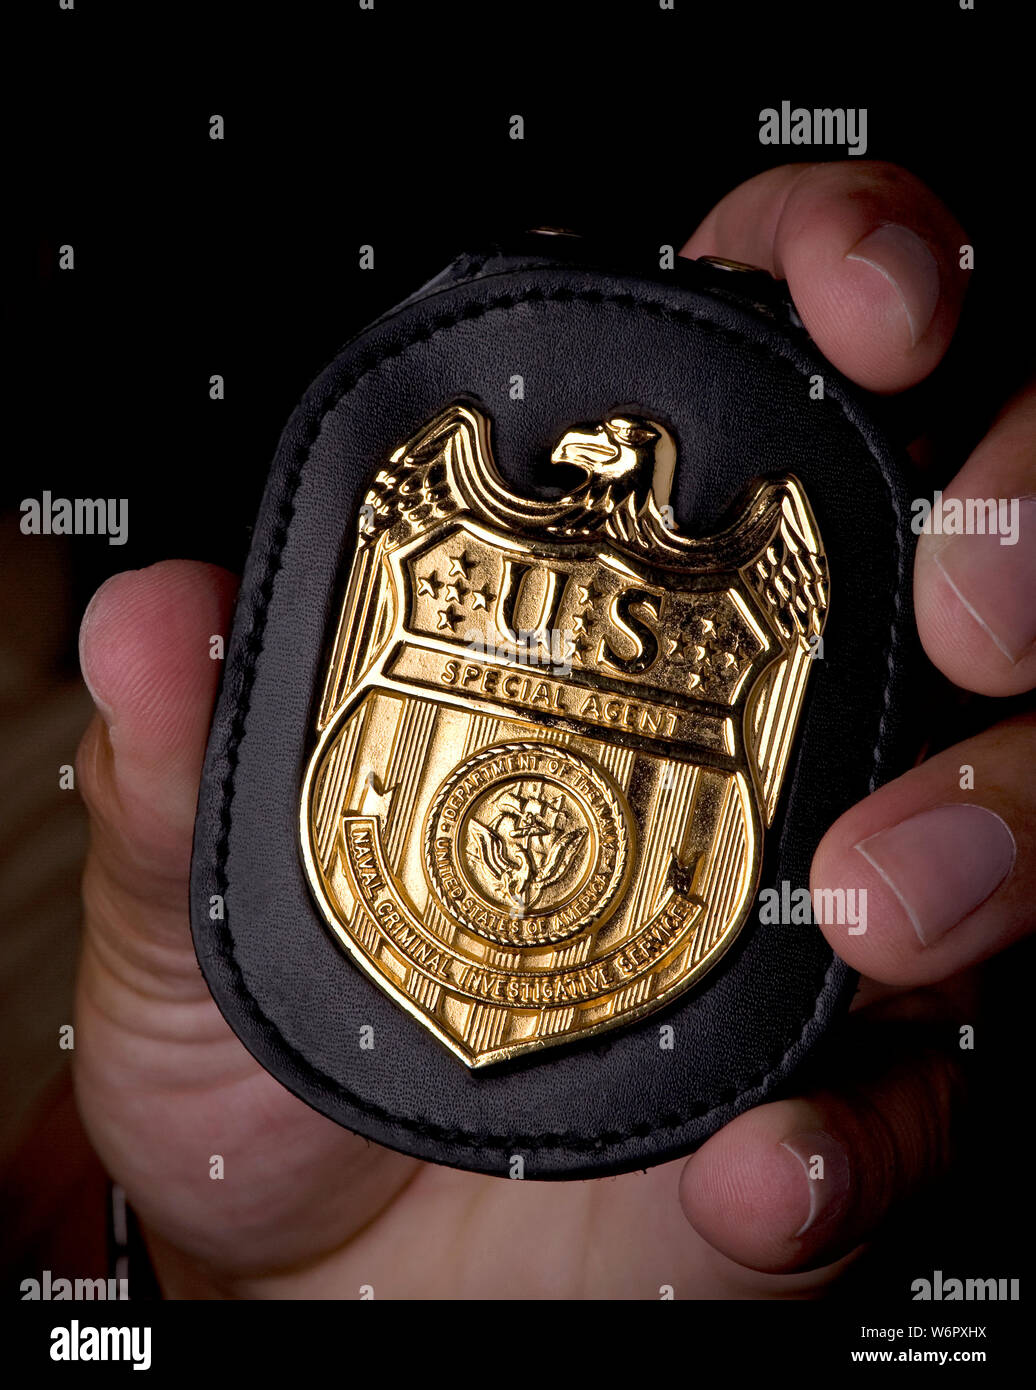 A close-up of an official NCIS Special Agent’s identification badge. NCIS (the Naval Criminal Investigative Service) is the US Navy's primary law enforcement and counterintelligence force. The agency works alongside local, state, and federal law enforcement as well as foreign agencies to counter and investigate serious crimes such as terrorism and espionage as well as dealing with common felonies involving Department of the Navy personnel. US Navy photo by Mass Communication Specialist 1st Class R. Jason Brunson. Stock Photo